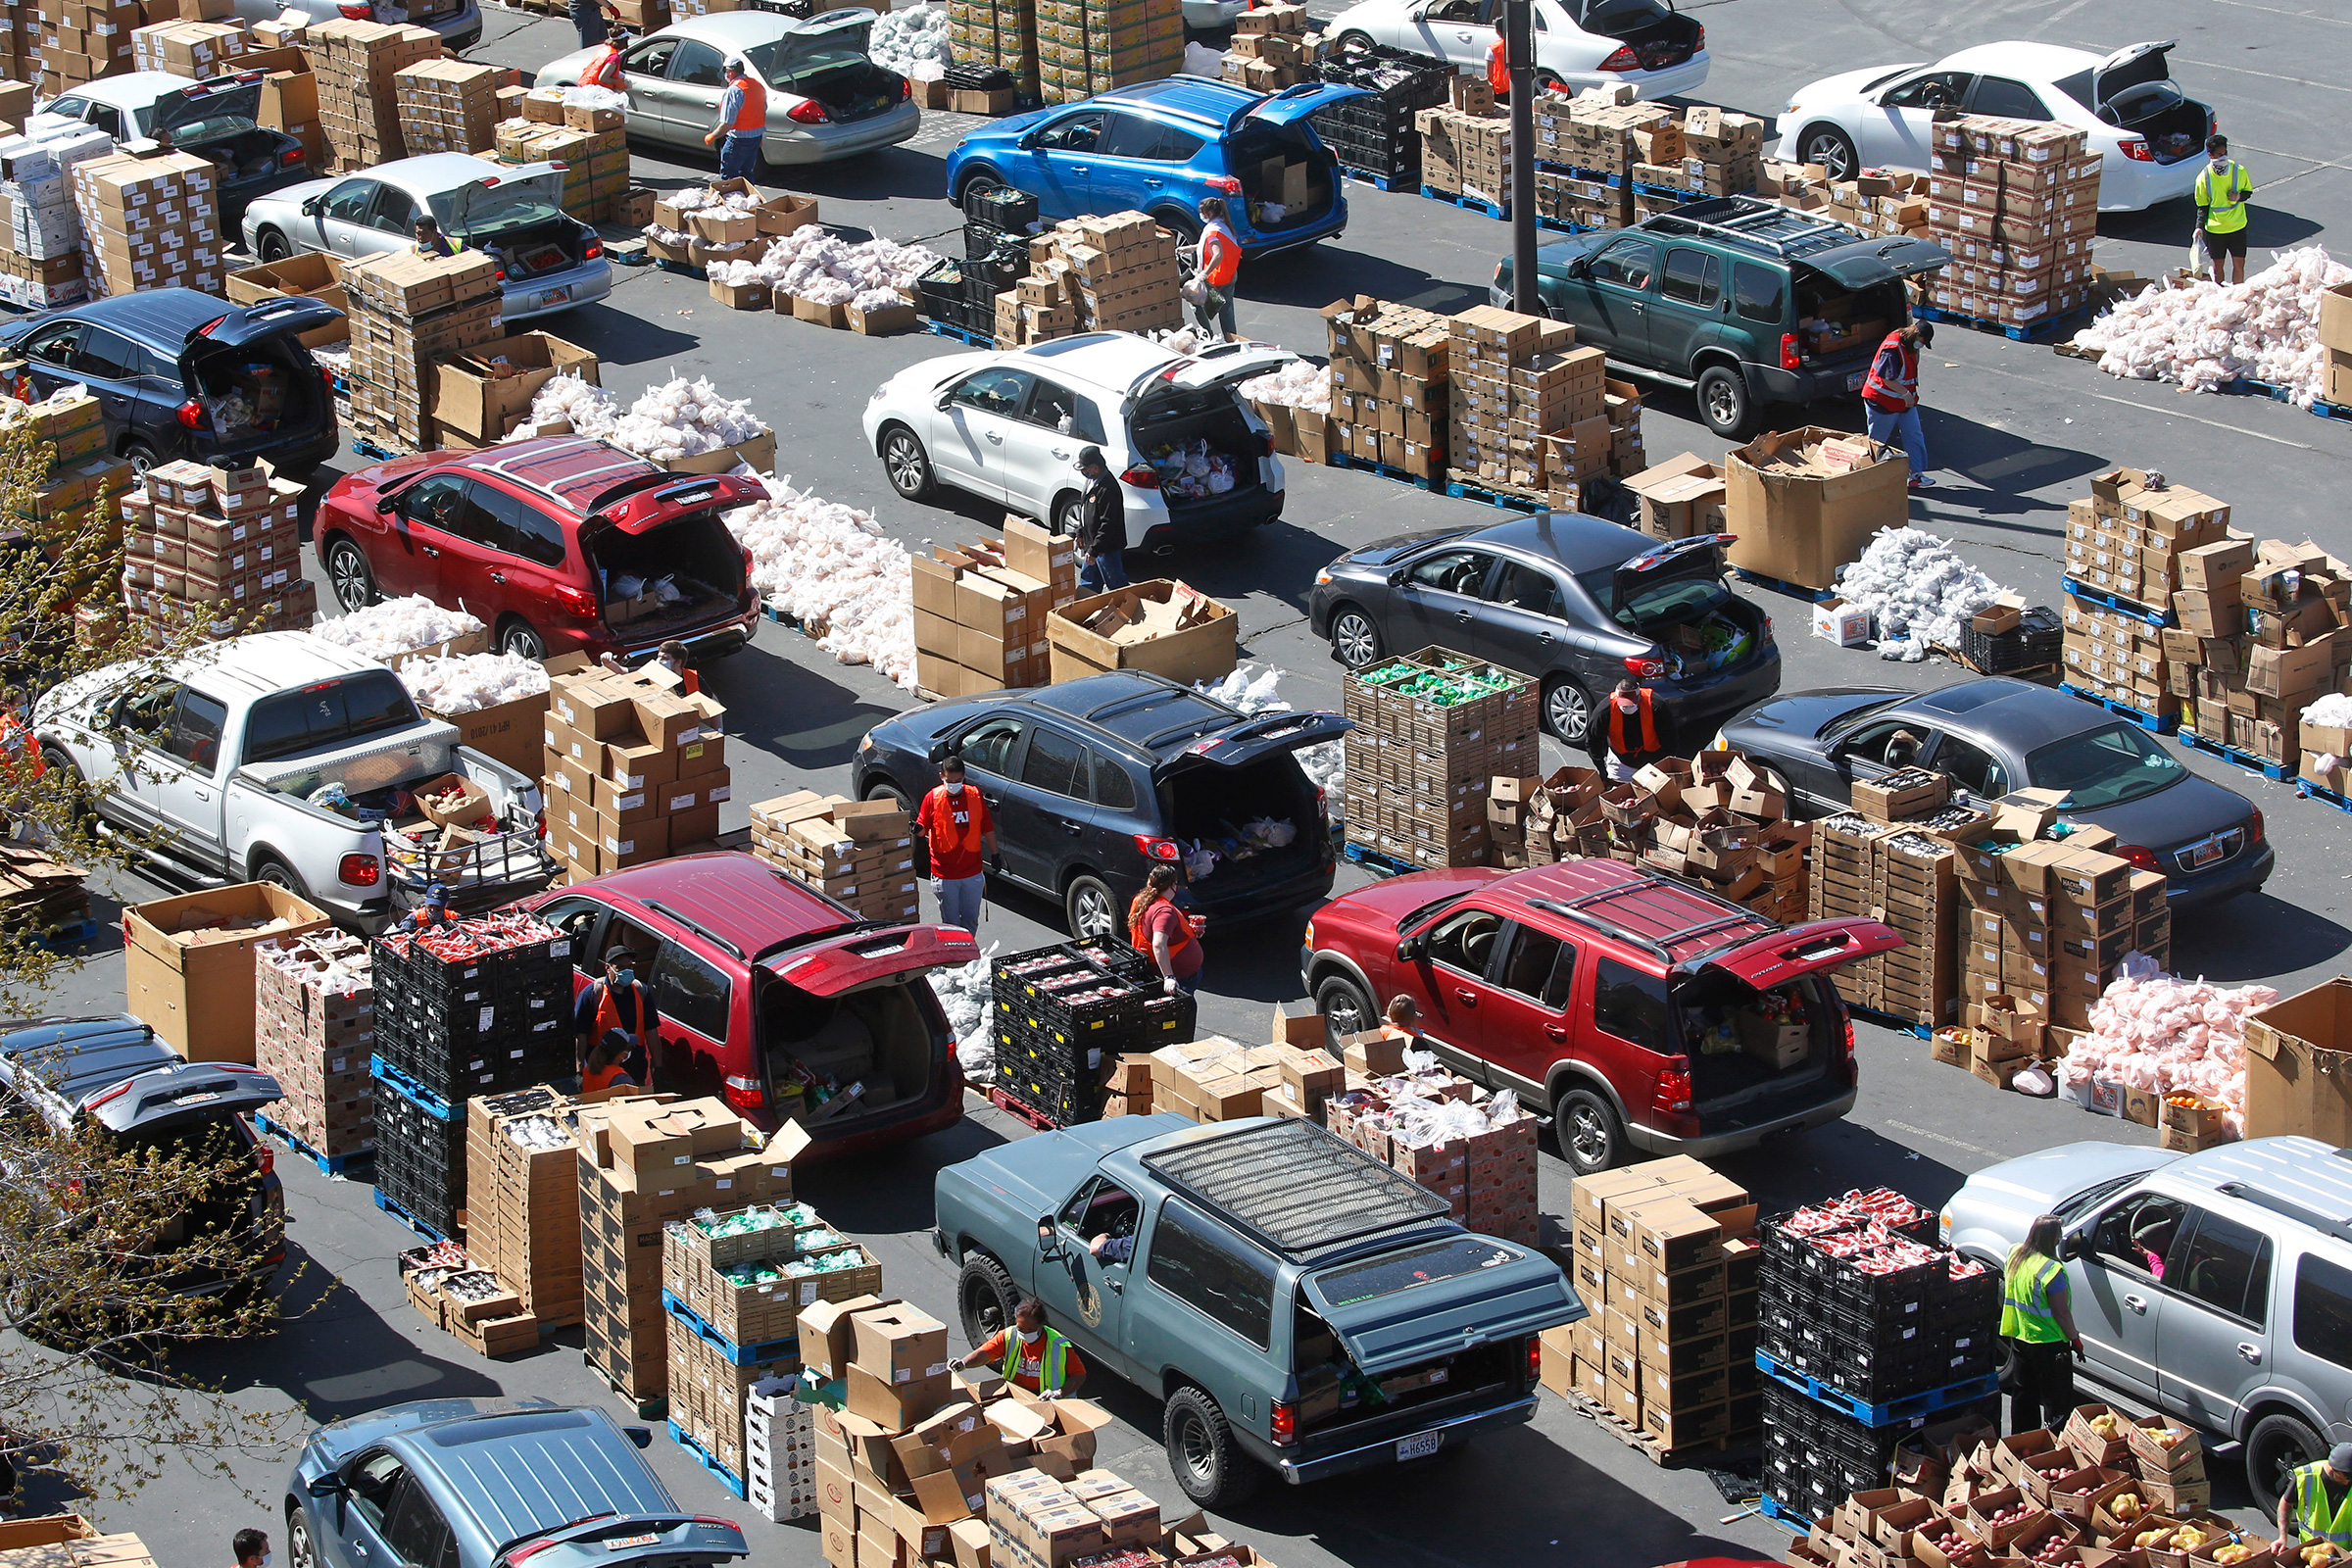 Cars line up at the Utah Food Bank's mobile food pantry in West Valley City on April 24. (Rick Bowmer—AP)